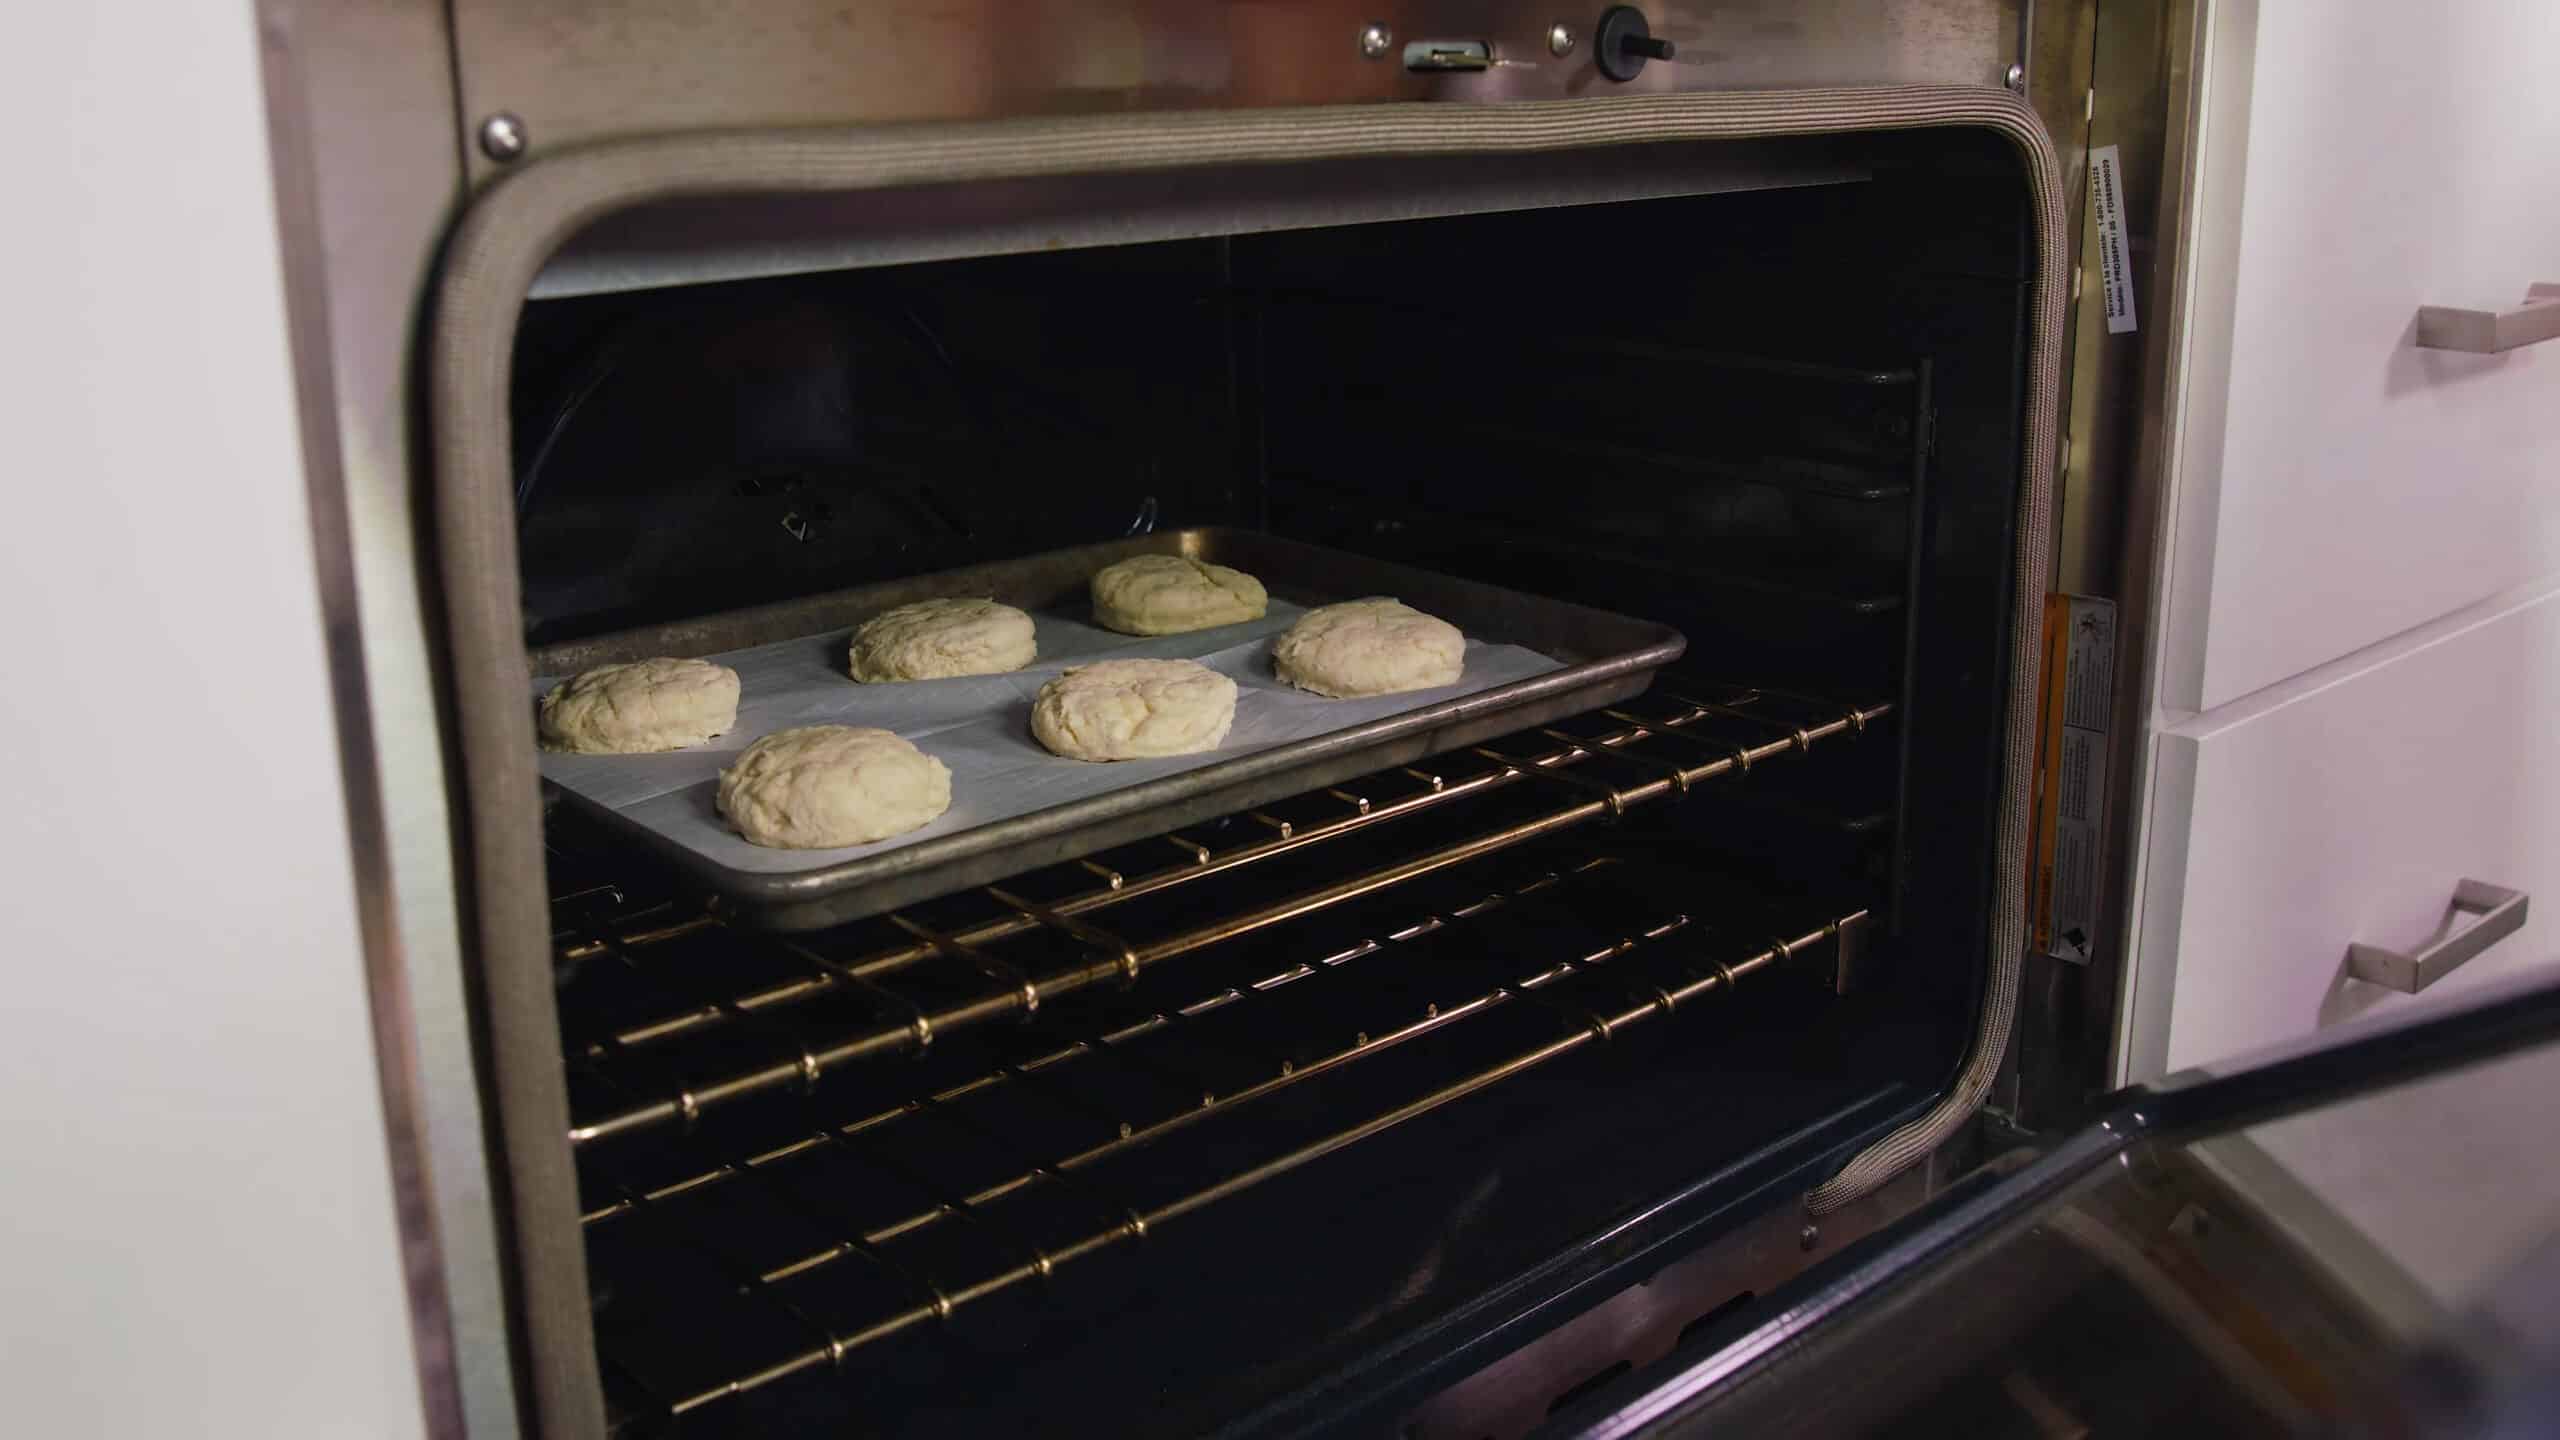 Angled view of interior of an oven with the door open and a baking sheet with parchment paper and six buttermilk biscuits on top.